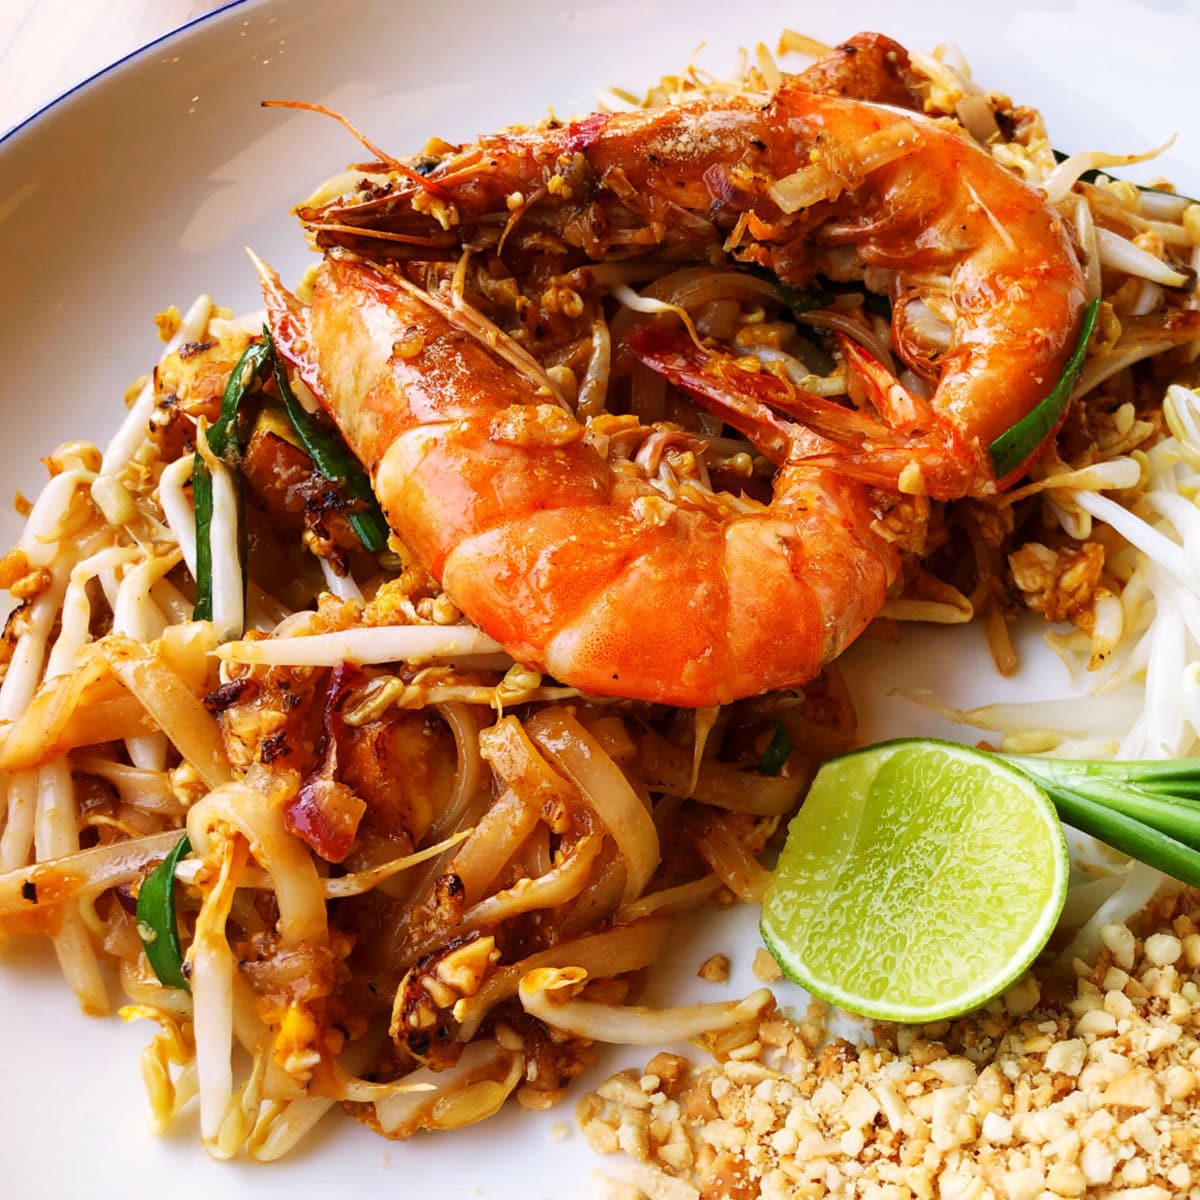 There are so many different types of Pad Thai, but no matter what recipe you choose, there is always a question of what to serve with it. With its sweet and sour flavors, Pad Thai goes great with some savory sides.